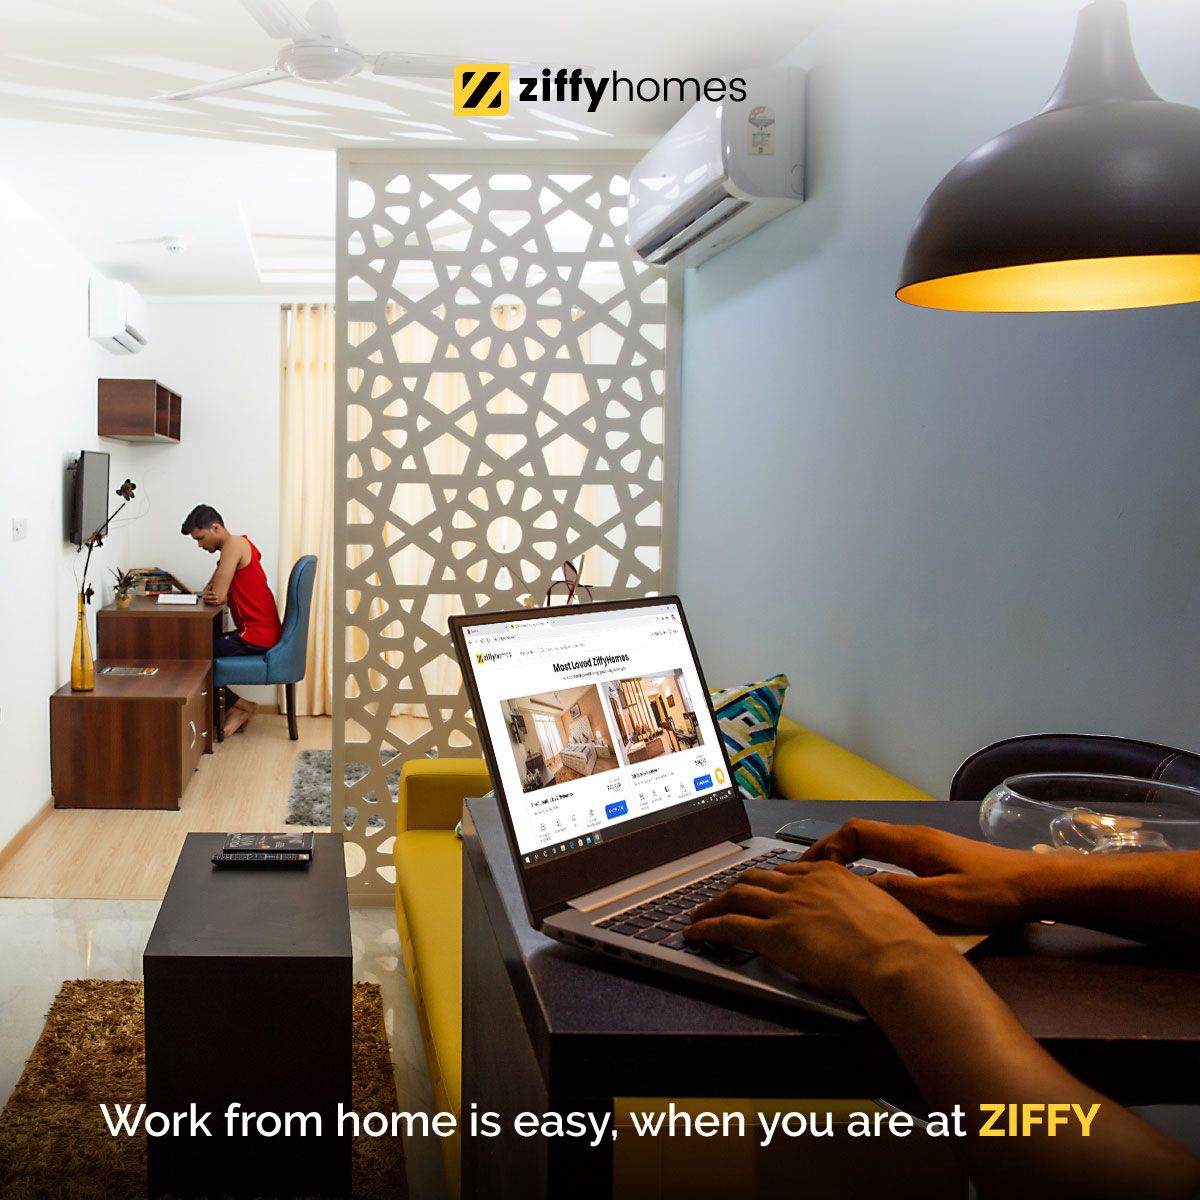 When you are at Ziffy, you get well Sanitized AC Rooms with High-Speed Internet, Food and most importantly Privacy. What else you need?

#WorkfromHome #WFH #WorkfromZiffy #ZiffyHomes #LifeatZiffy #coronavirus #ContactlessServices  #staysafe #GurgaonLockout #FightCovid19